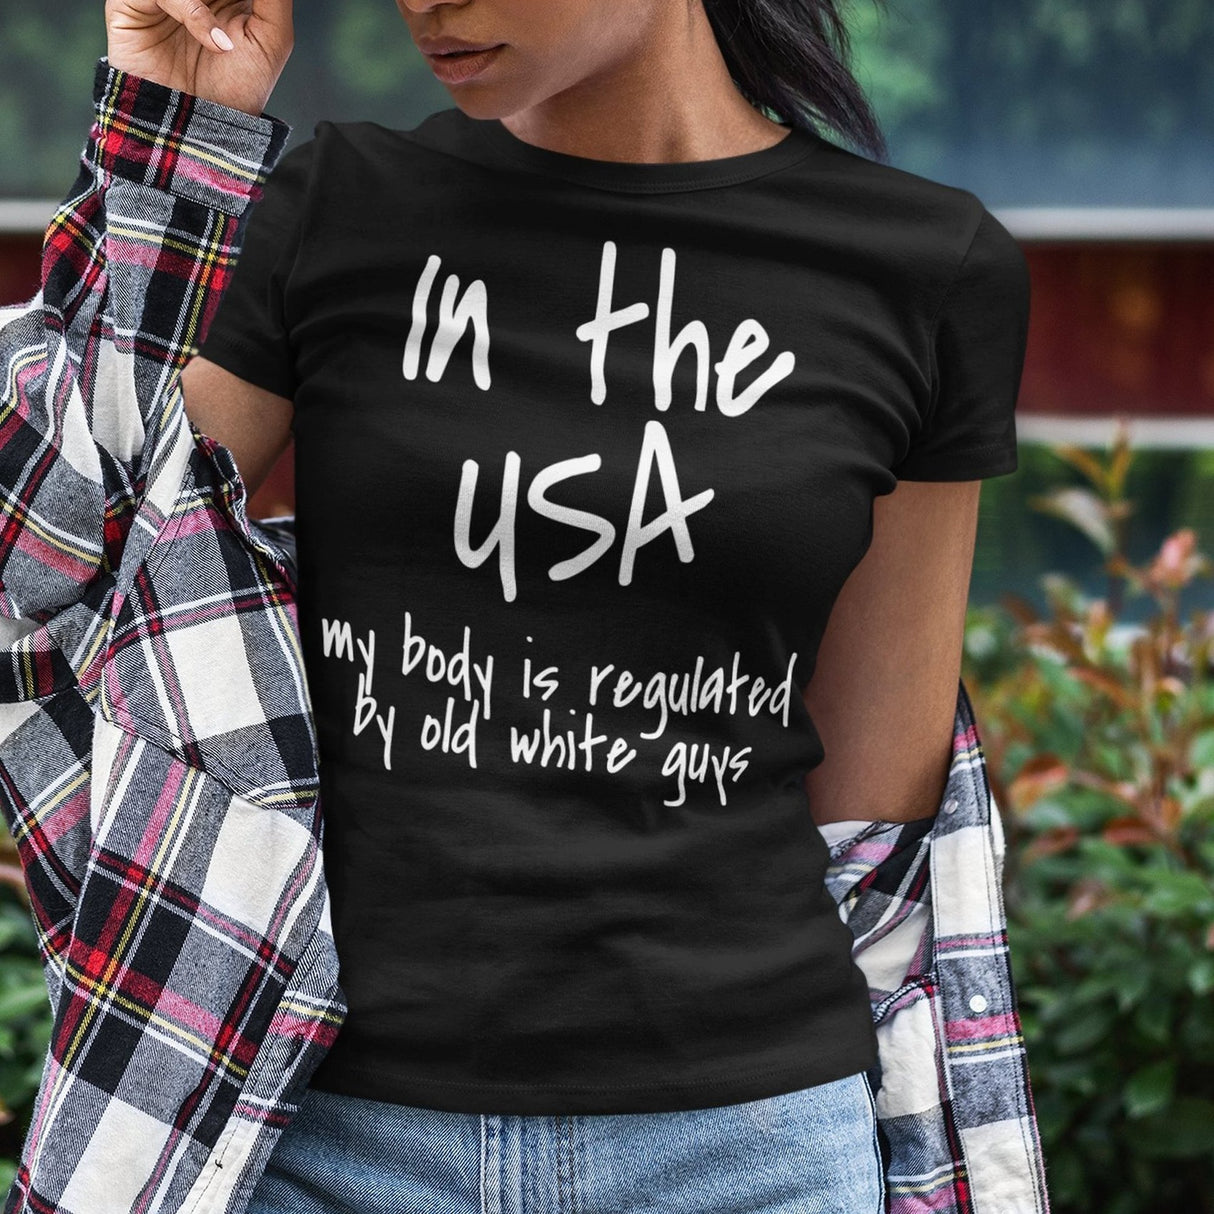 in-the-usa-my-body-is-regulated-by-old-white-guys-usa-tee-body-t-shirt-regulated-tee-t-shirt-tee#color_black